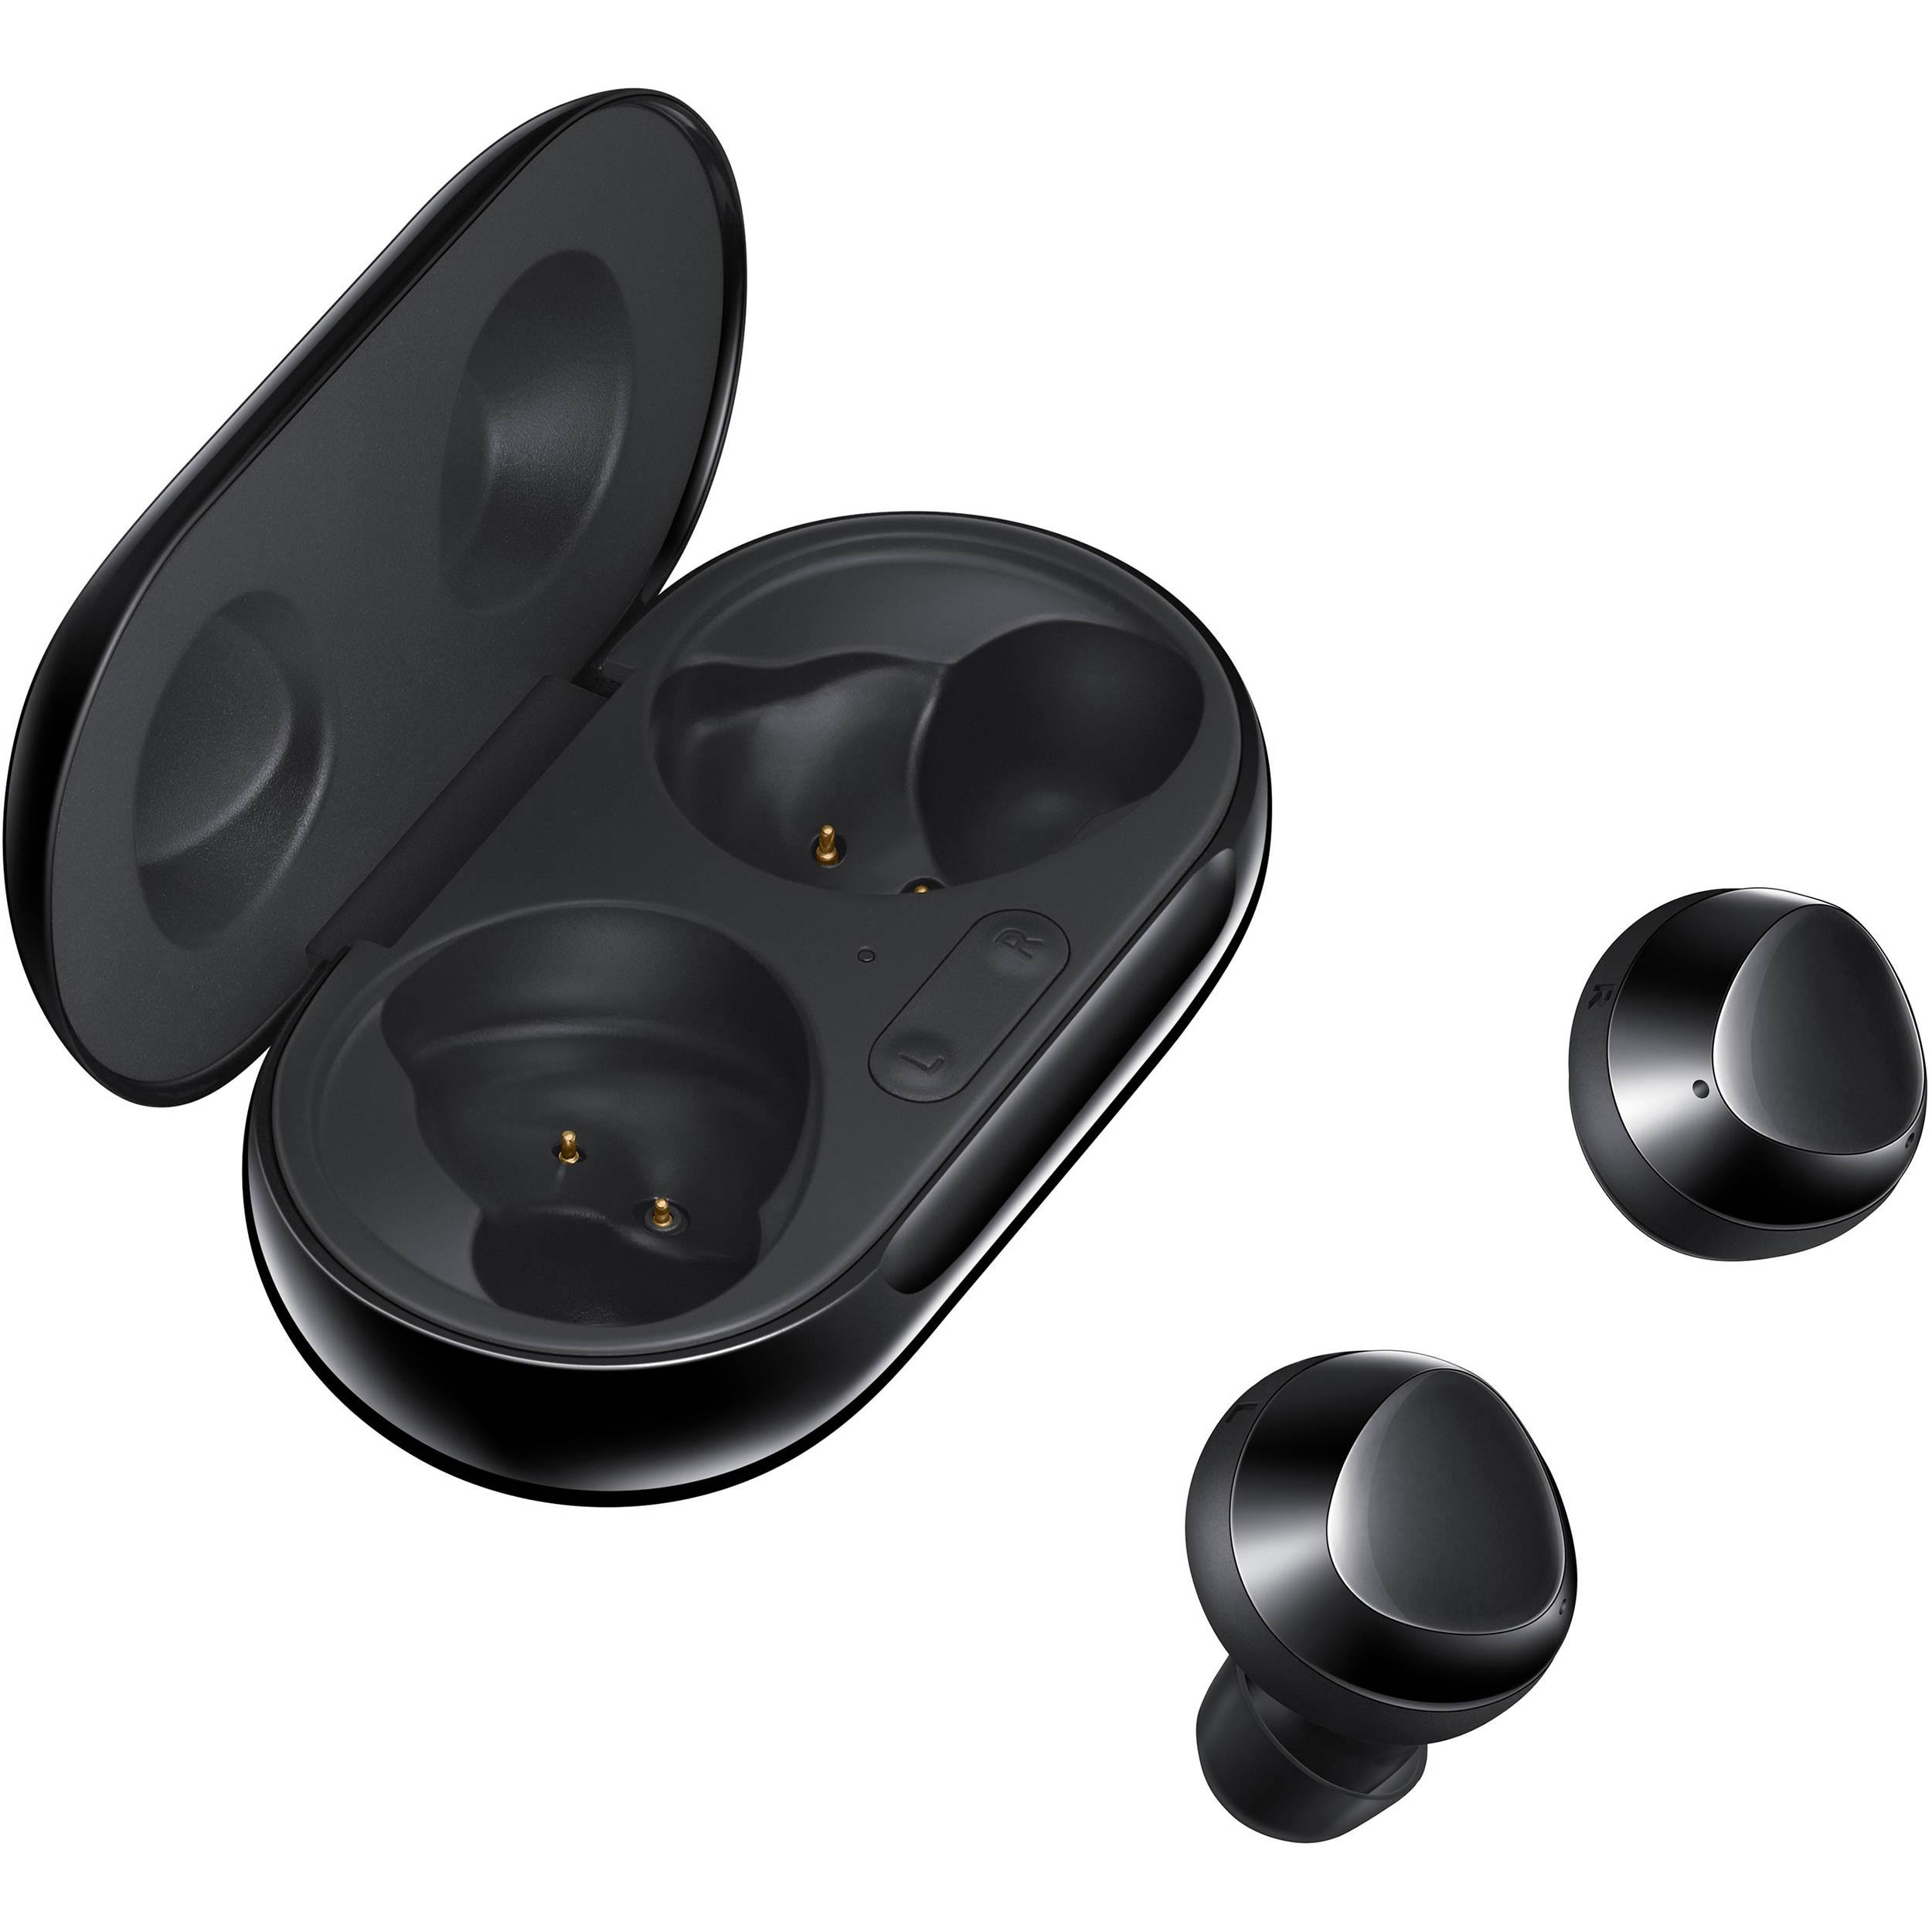 Samsung Galaxy Buds 2 Graphite (SM-R177NZKAASA), Well-Balanced Sound, Active Noise Cancelling, Comfort Fit, Up to 8 Hours of Play Time with ANC Off